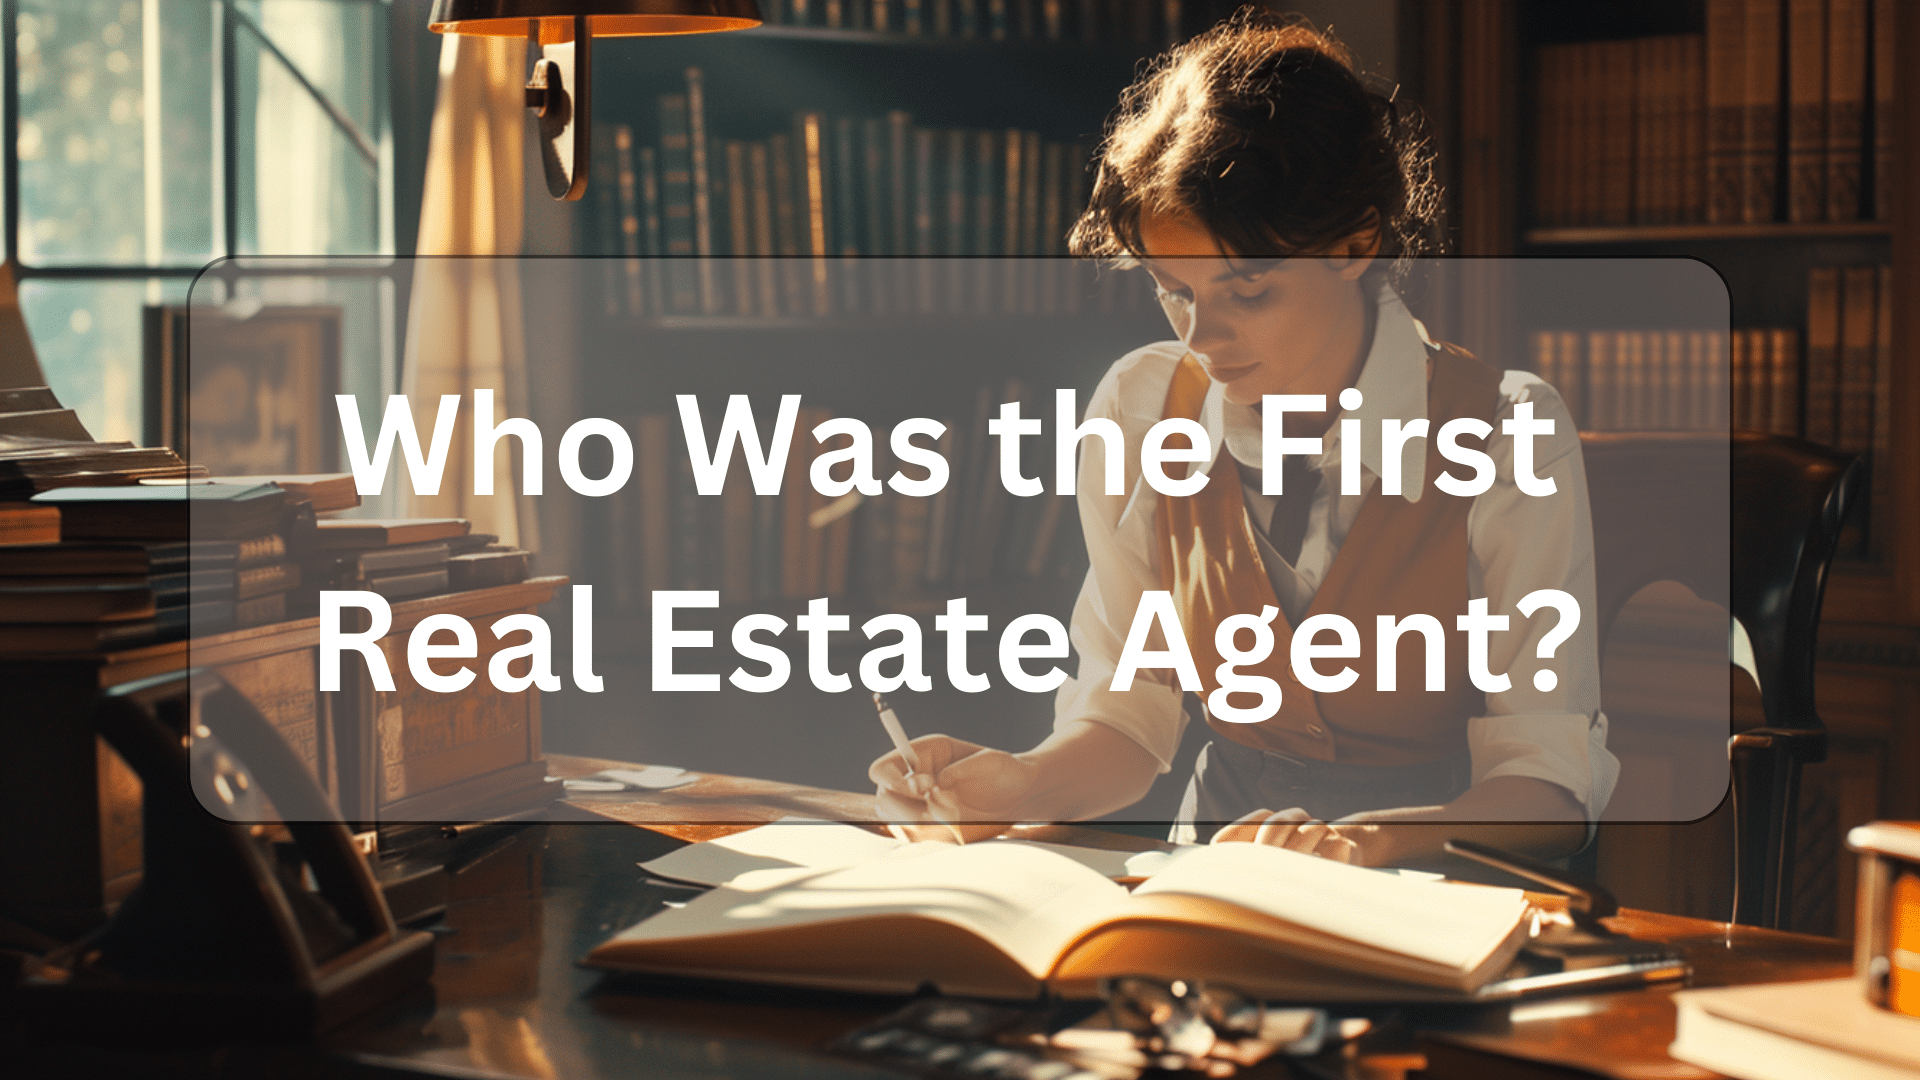 Who was the first real estate agent illustration